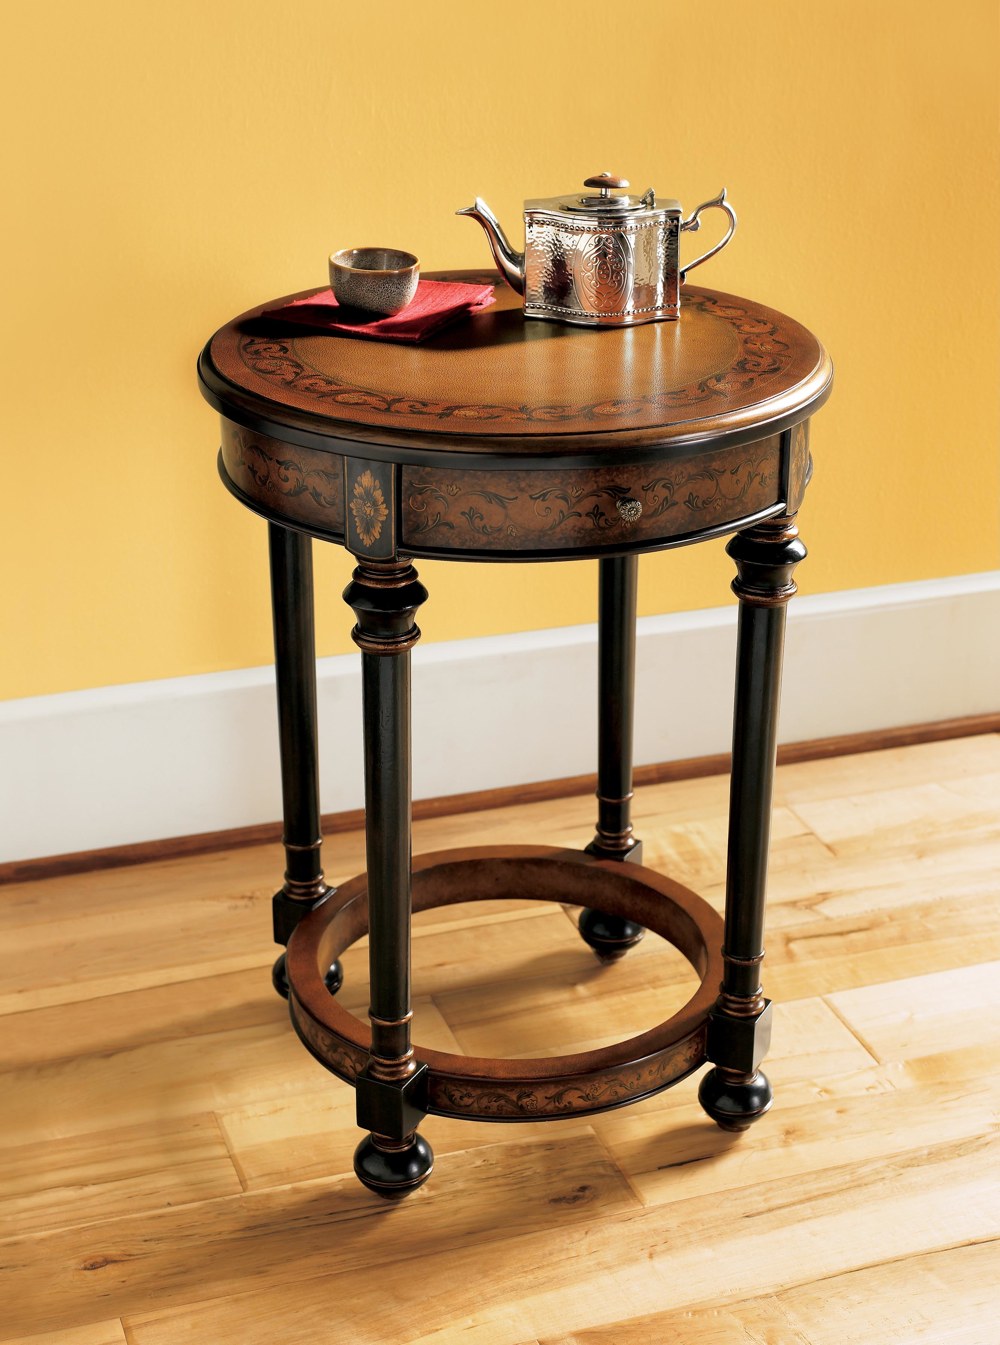 bombay accent tables aharney the company relaunches mommies with cents marble top table modern furniture edmonton narrow wood end small antique folding diy barndoor clearance